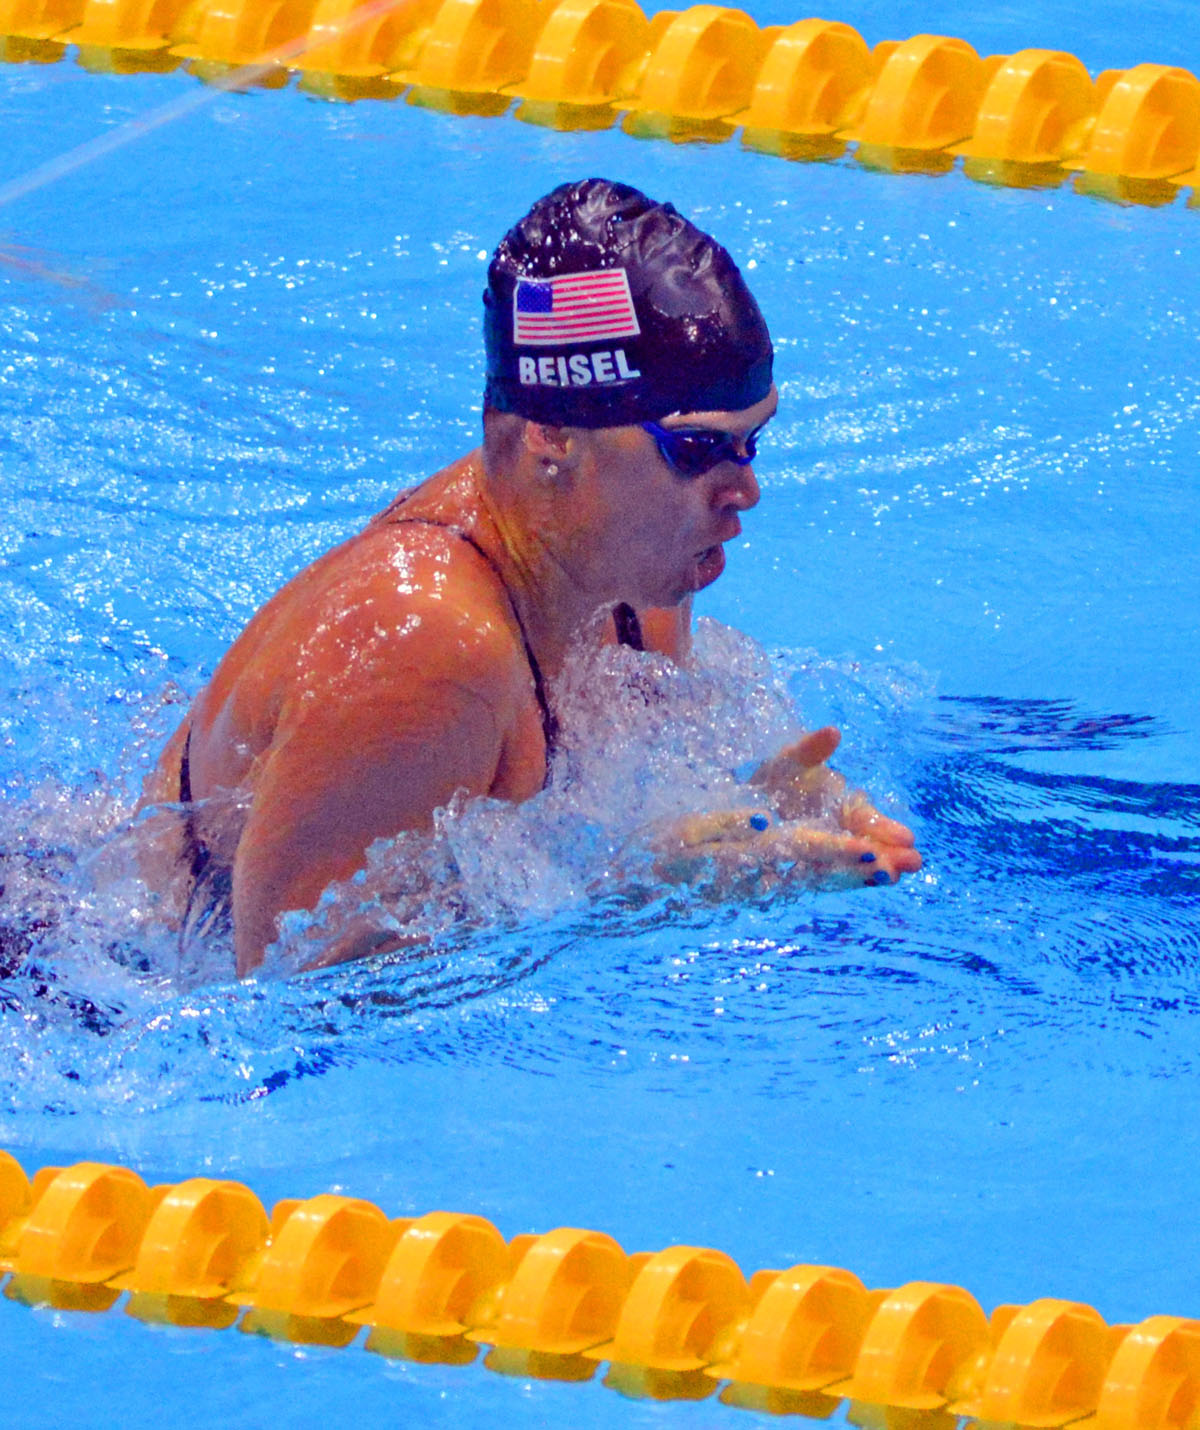 USA swimmer, Elizabeth Beisel, shows her outstanding form in the Breaststroke segment of the Women's 400 Individual Medley . Beisel earned a silver medal.(AP Photo/Dick Druckman)